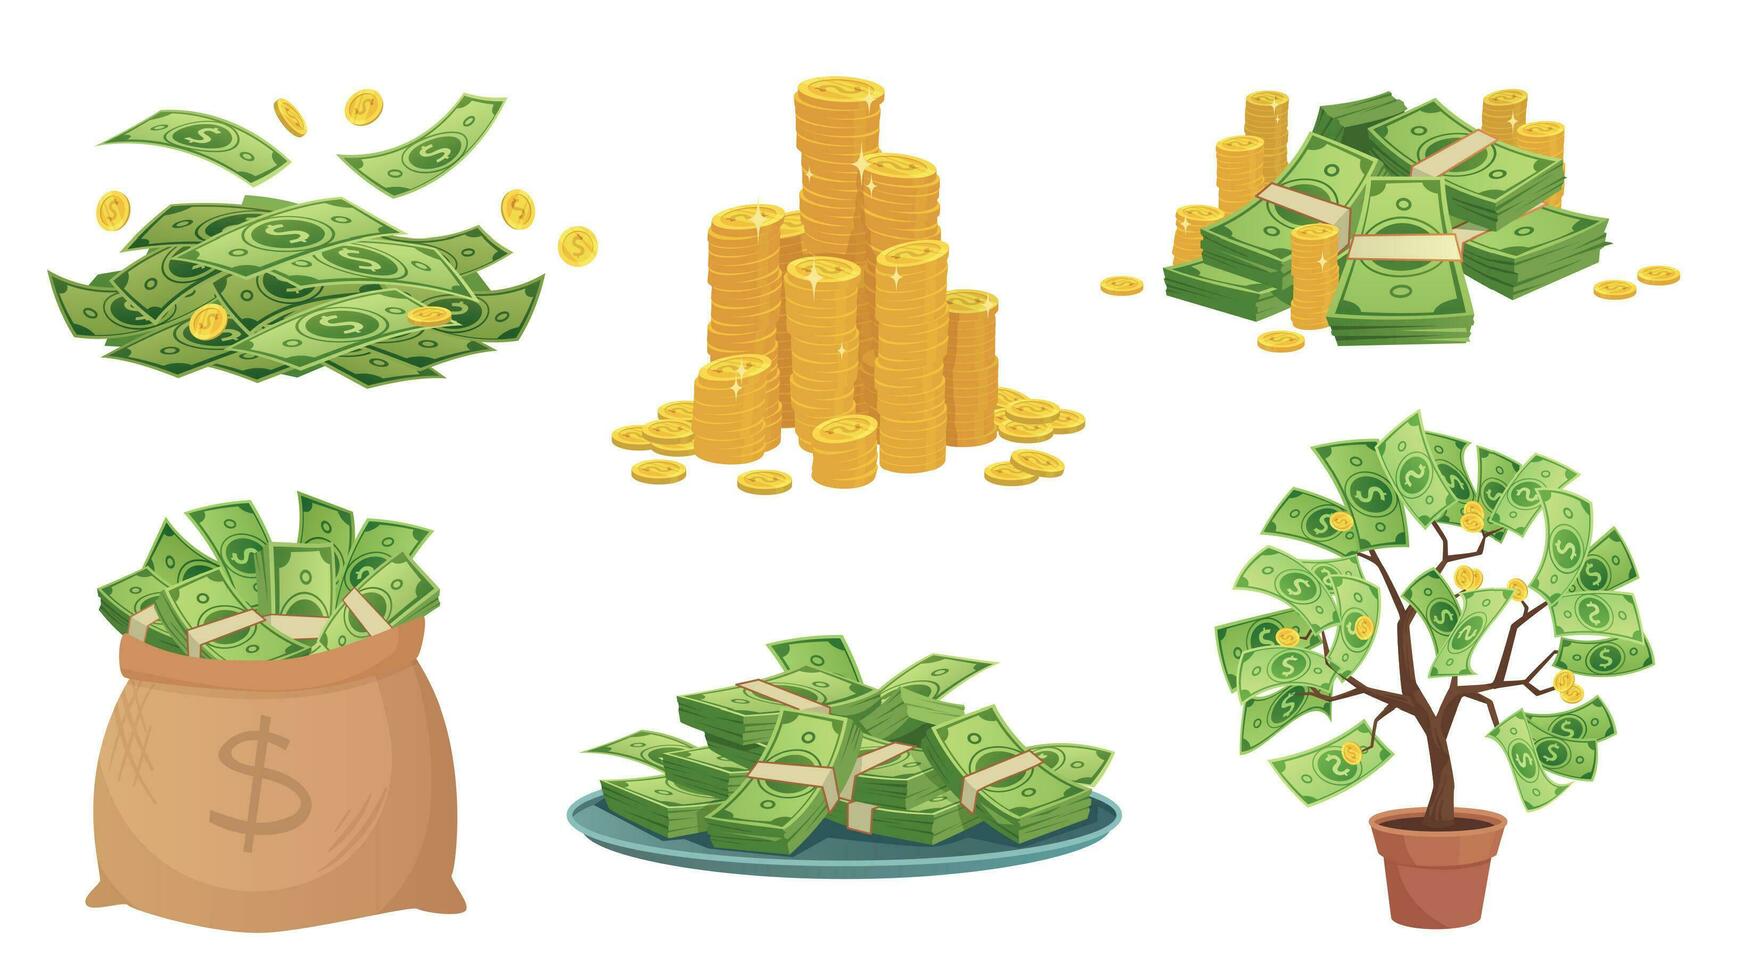 Cartoon cash. Green dollar banknotes pile, rich gold coins and pay. Cash bag, tray with stacks of bills and money tree vector illustration set